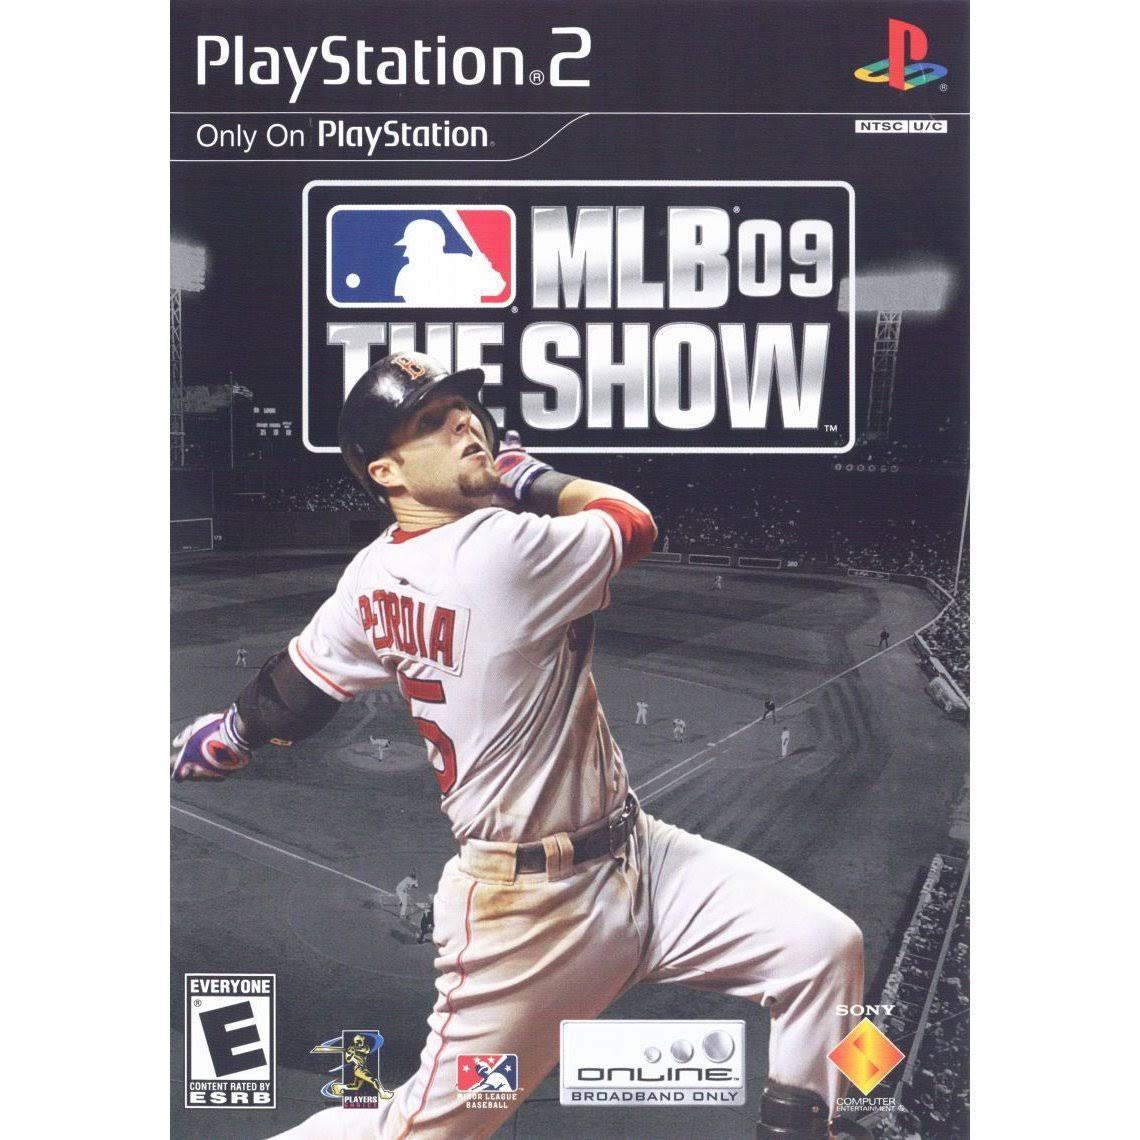 MLB 09 The Show - Play Station 2